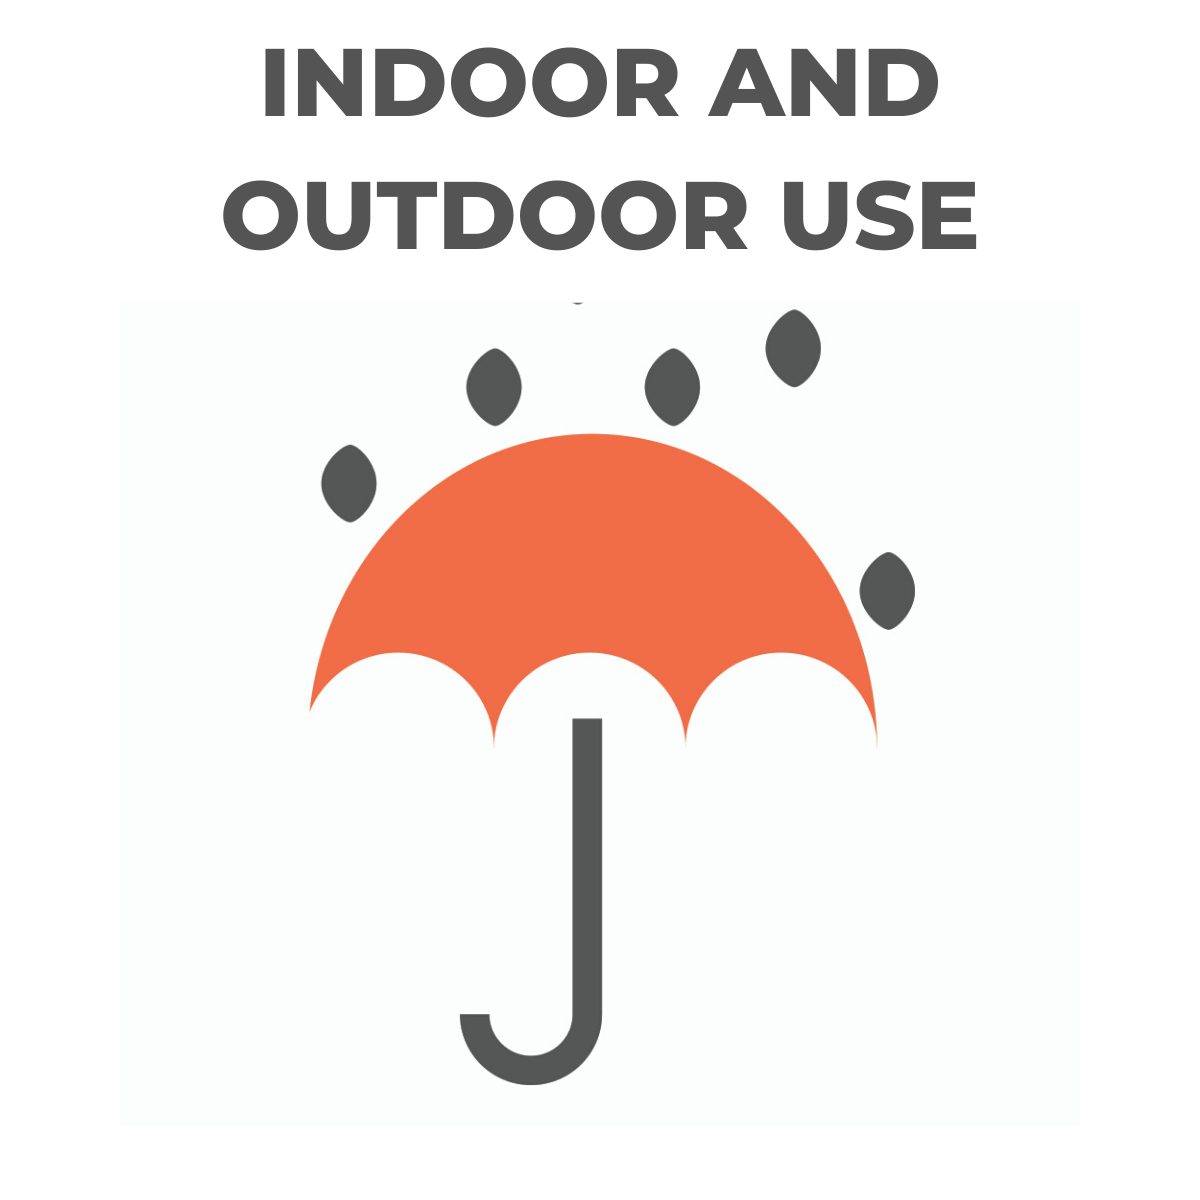 For indoor and outdoor use